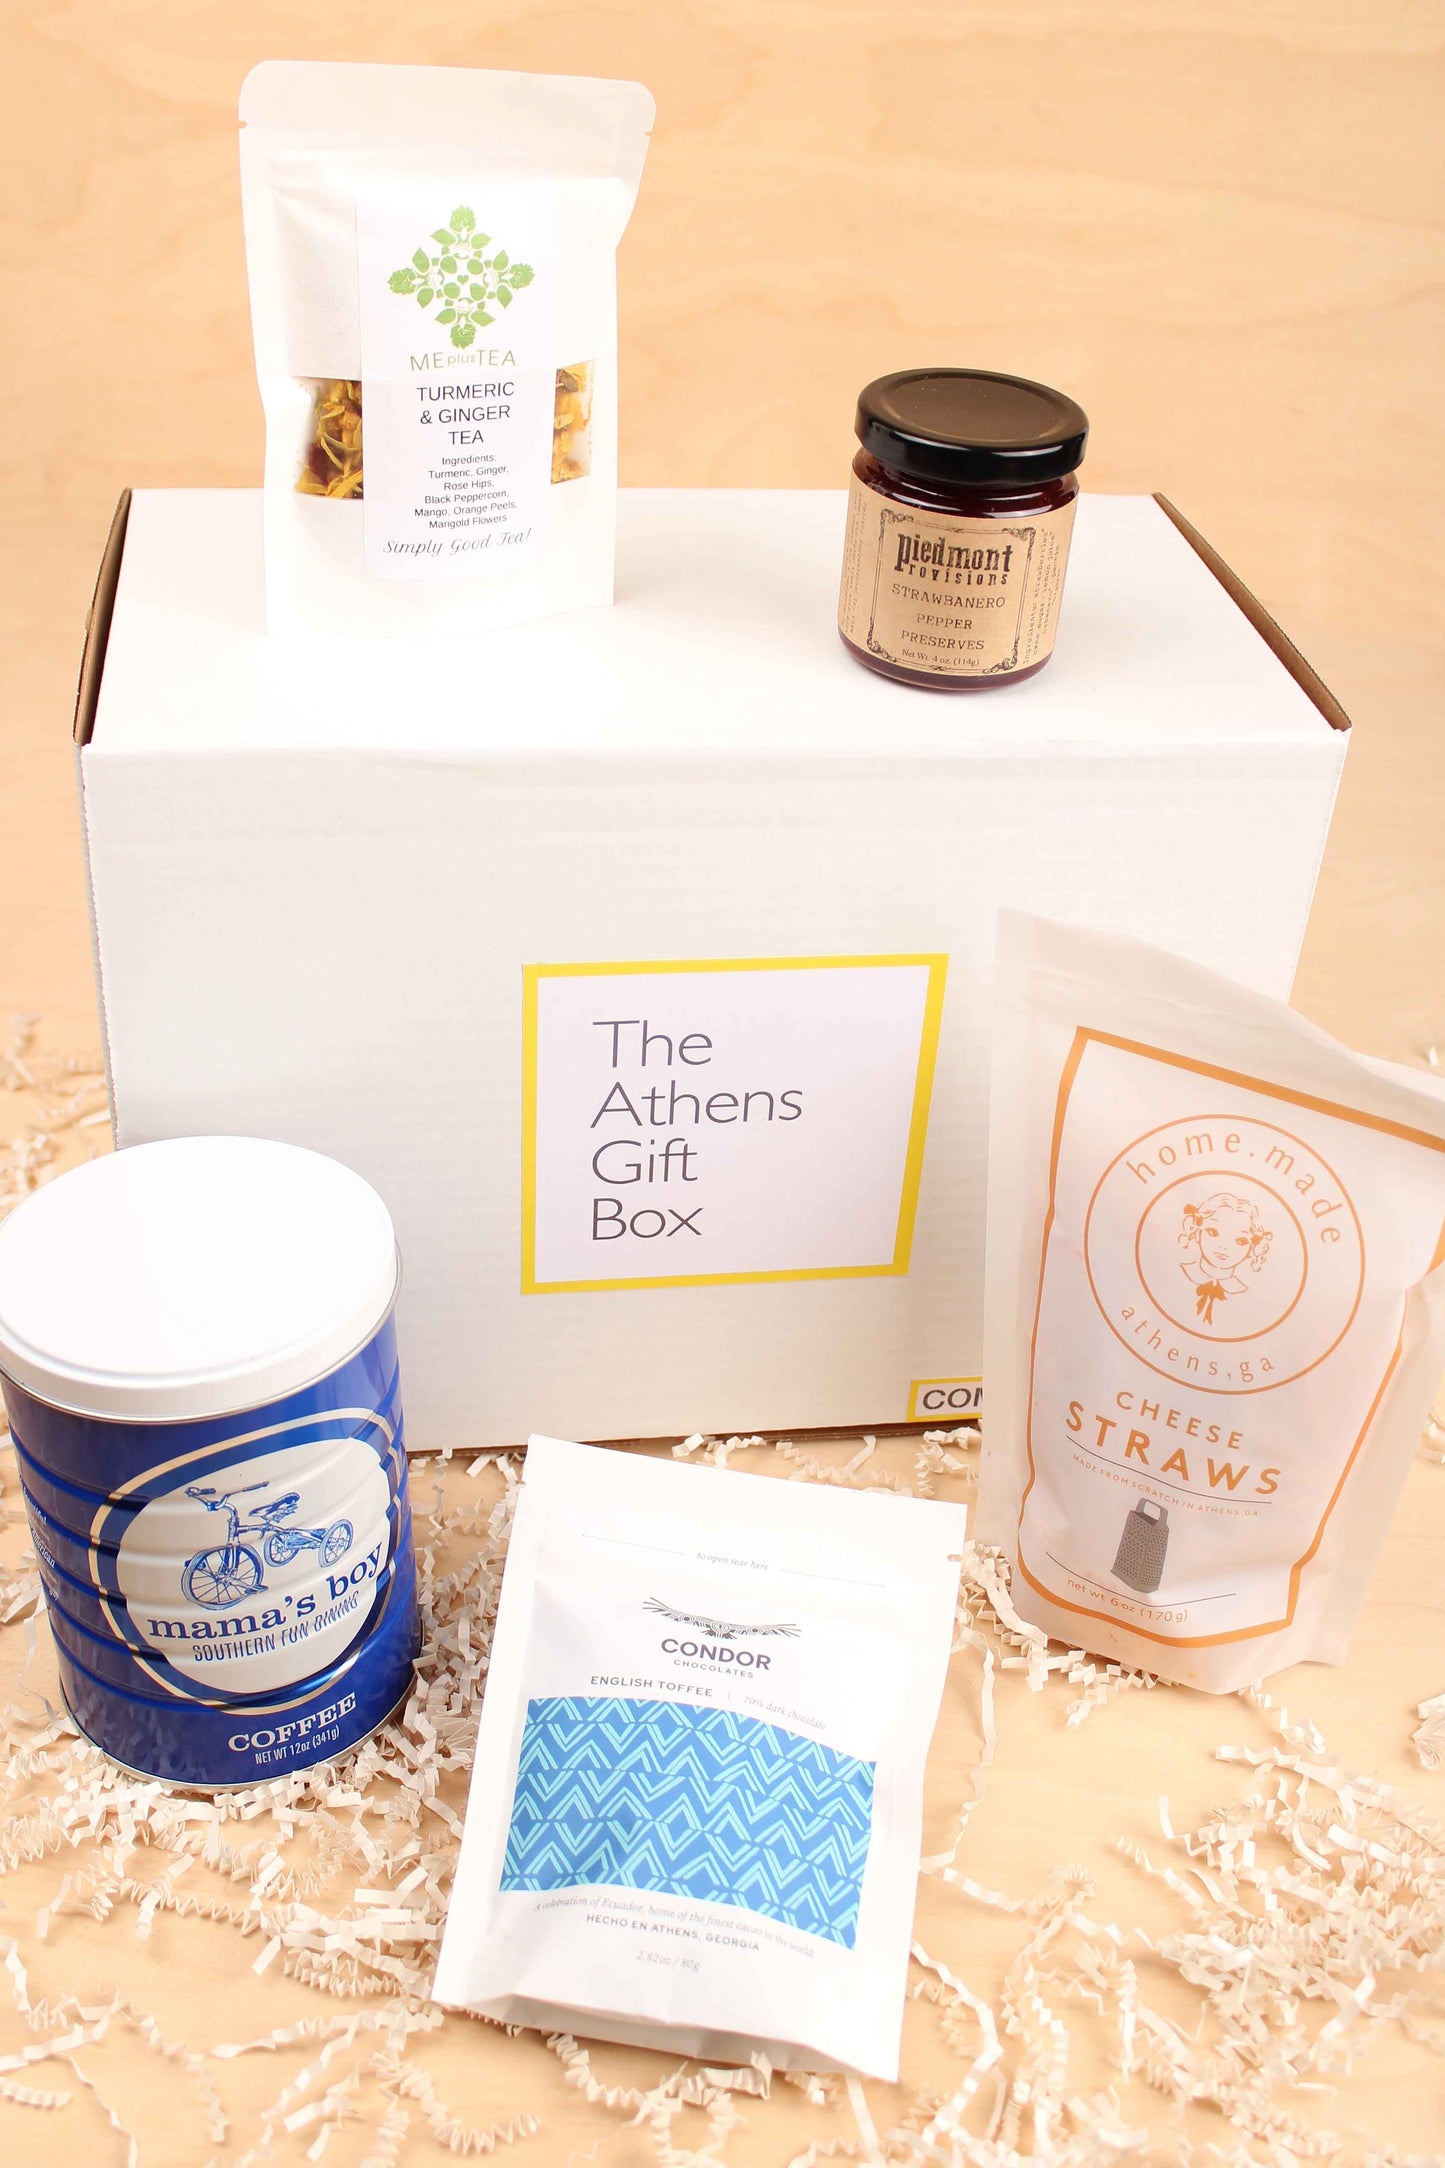 The New Taste of Athens Gift Box